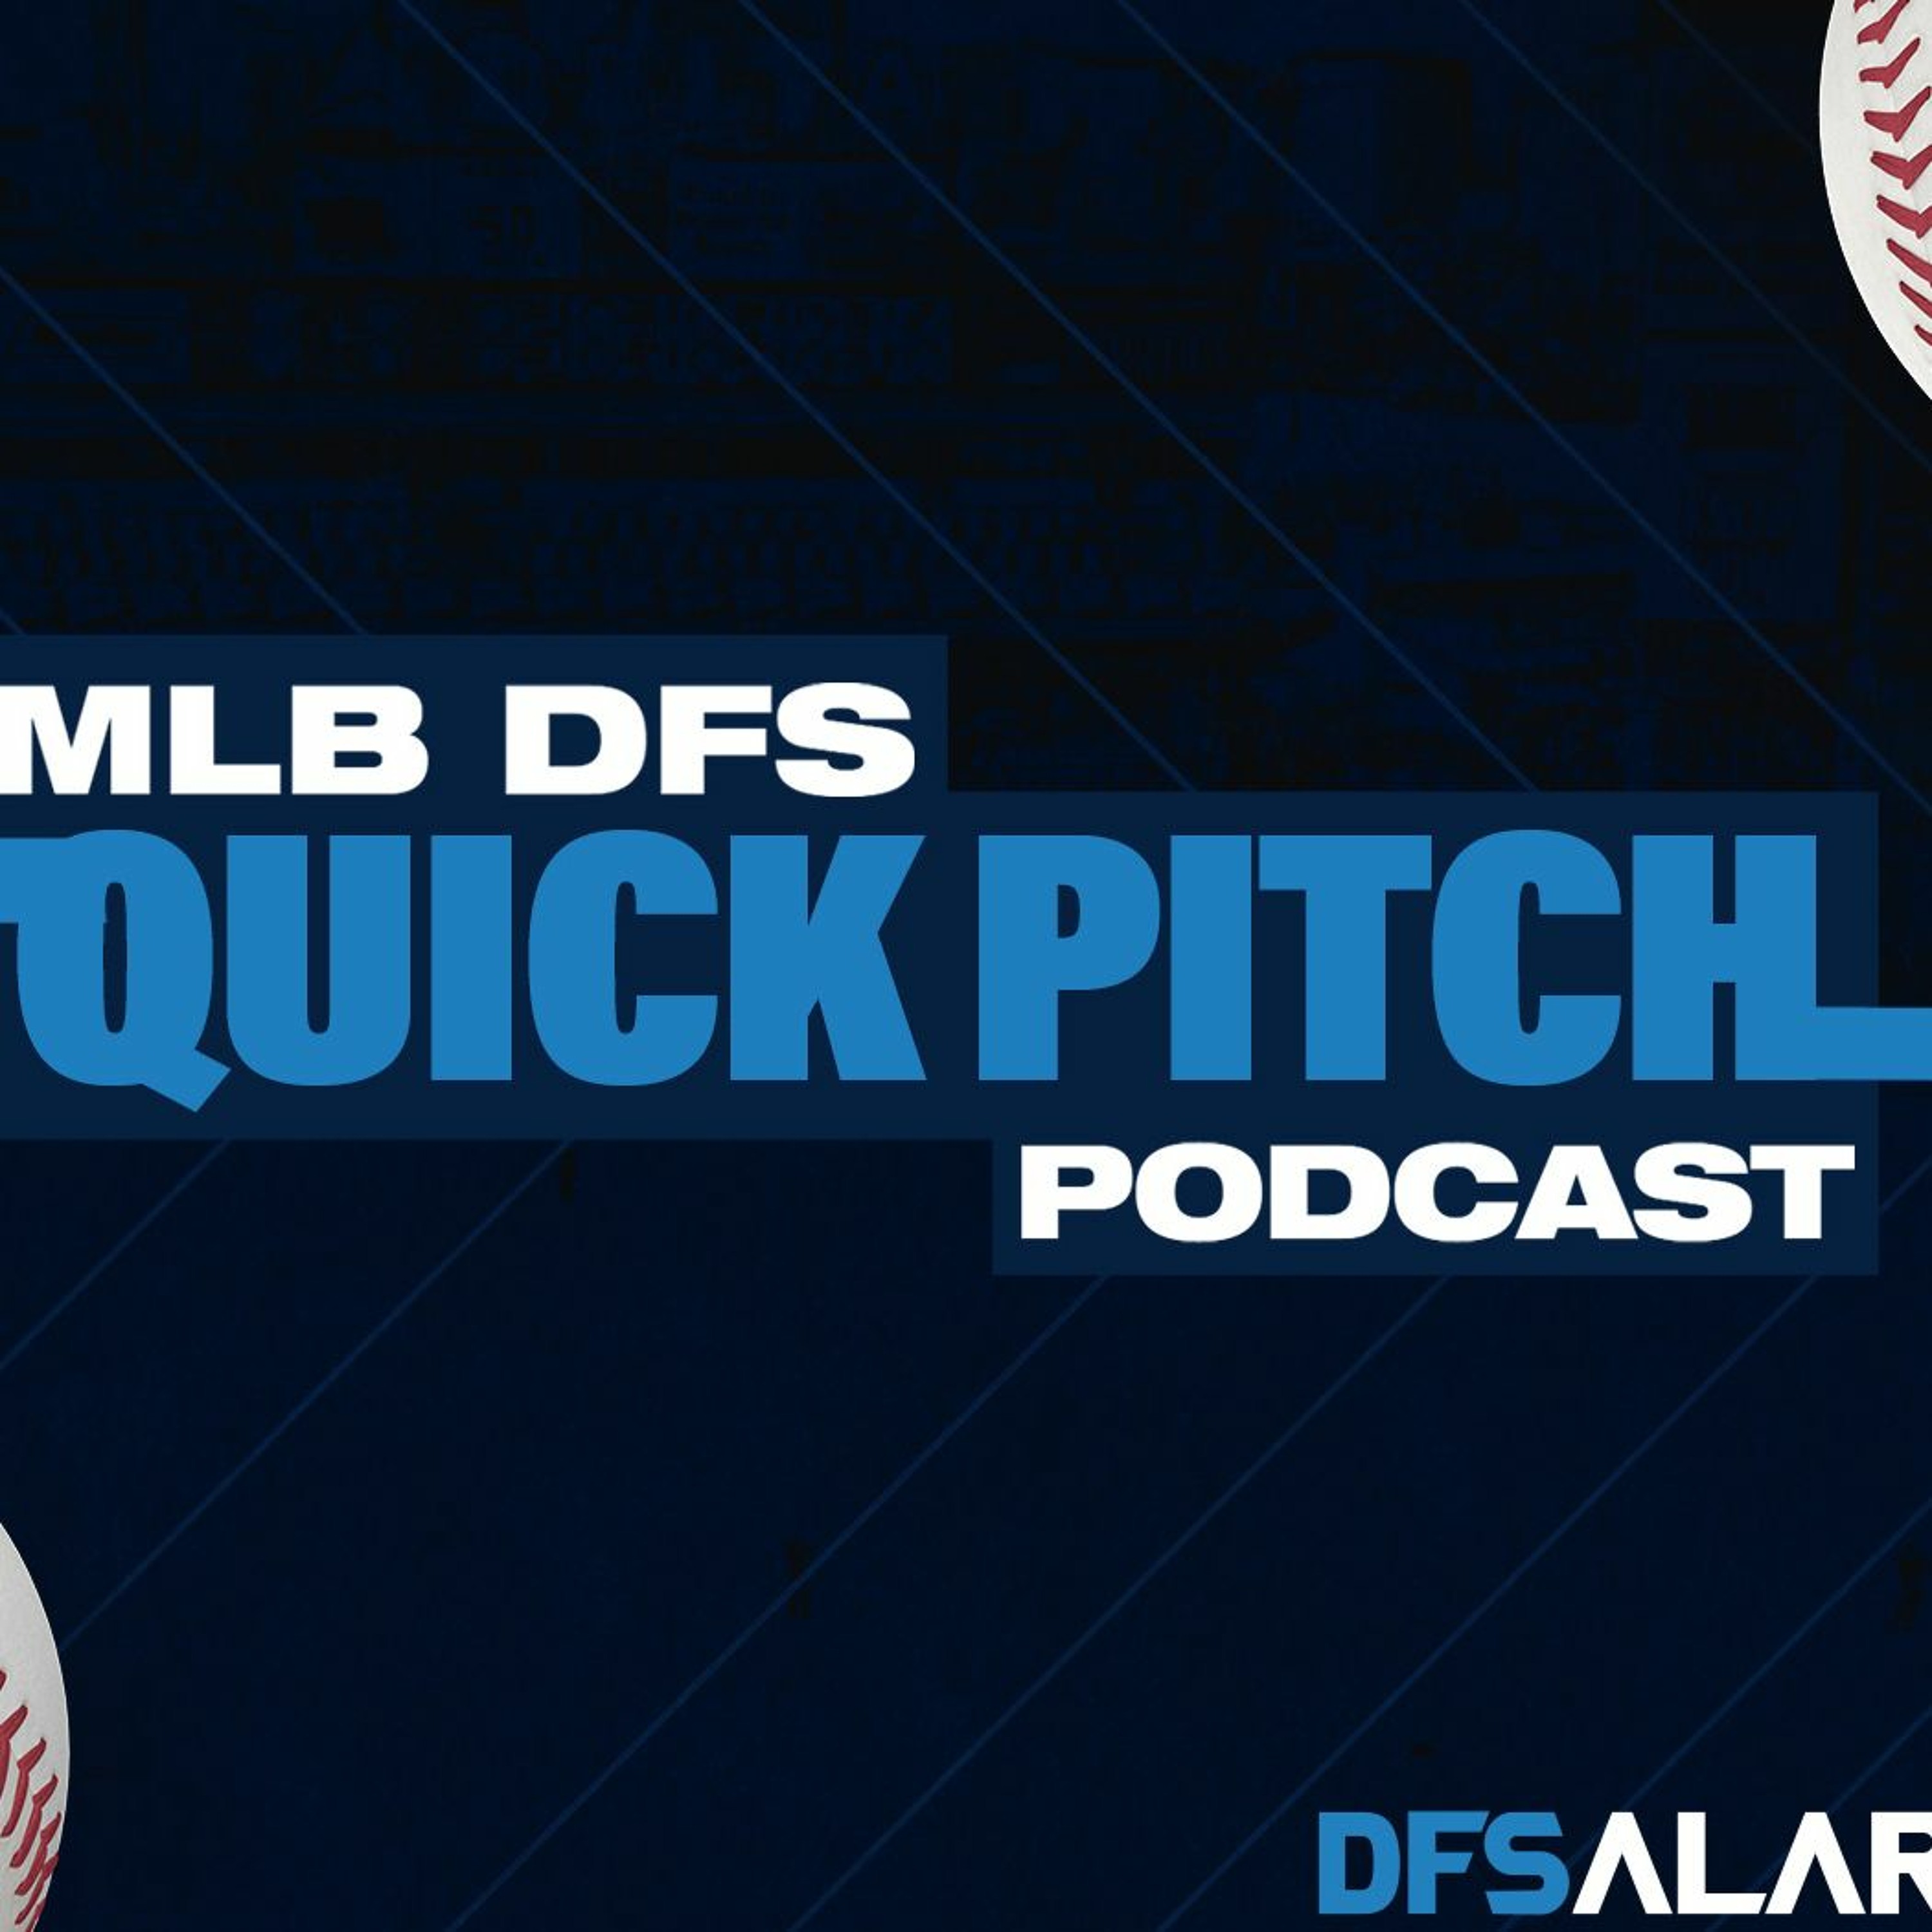 Quick Pitch MLB DFS Podcast - Max Scherzer Takes The Mound & Padres Top Stack